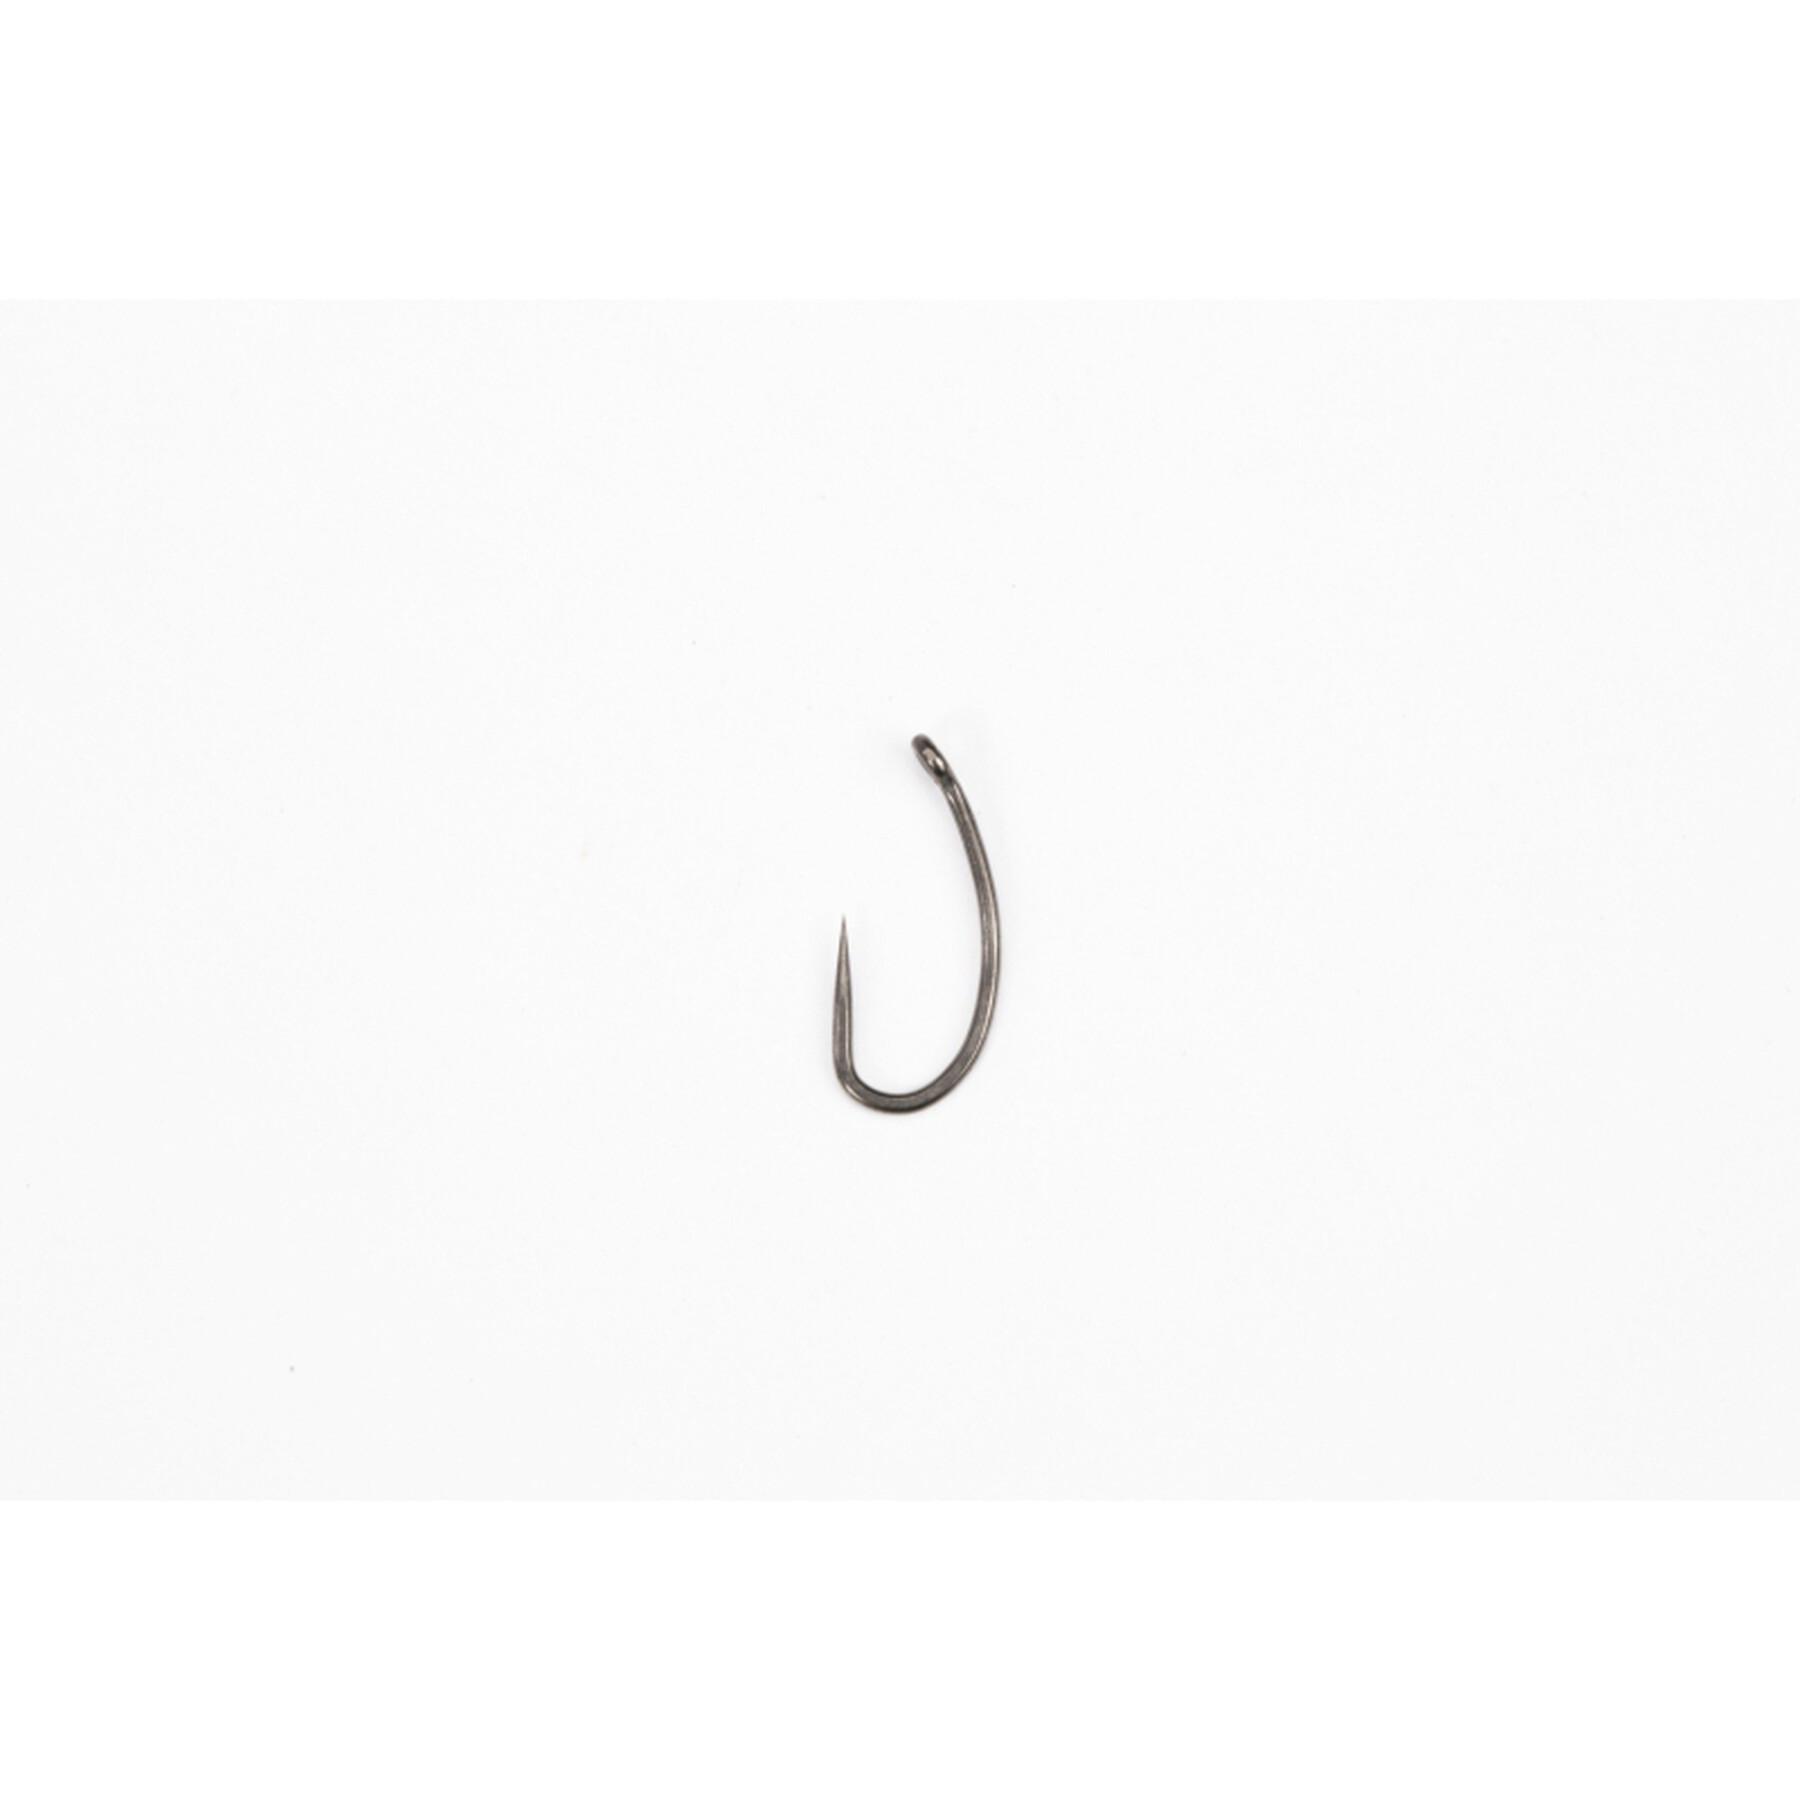 Hook Pinpoint Fang X size 5 without swivel